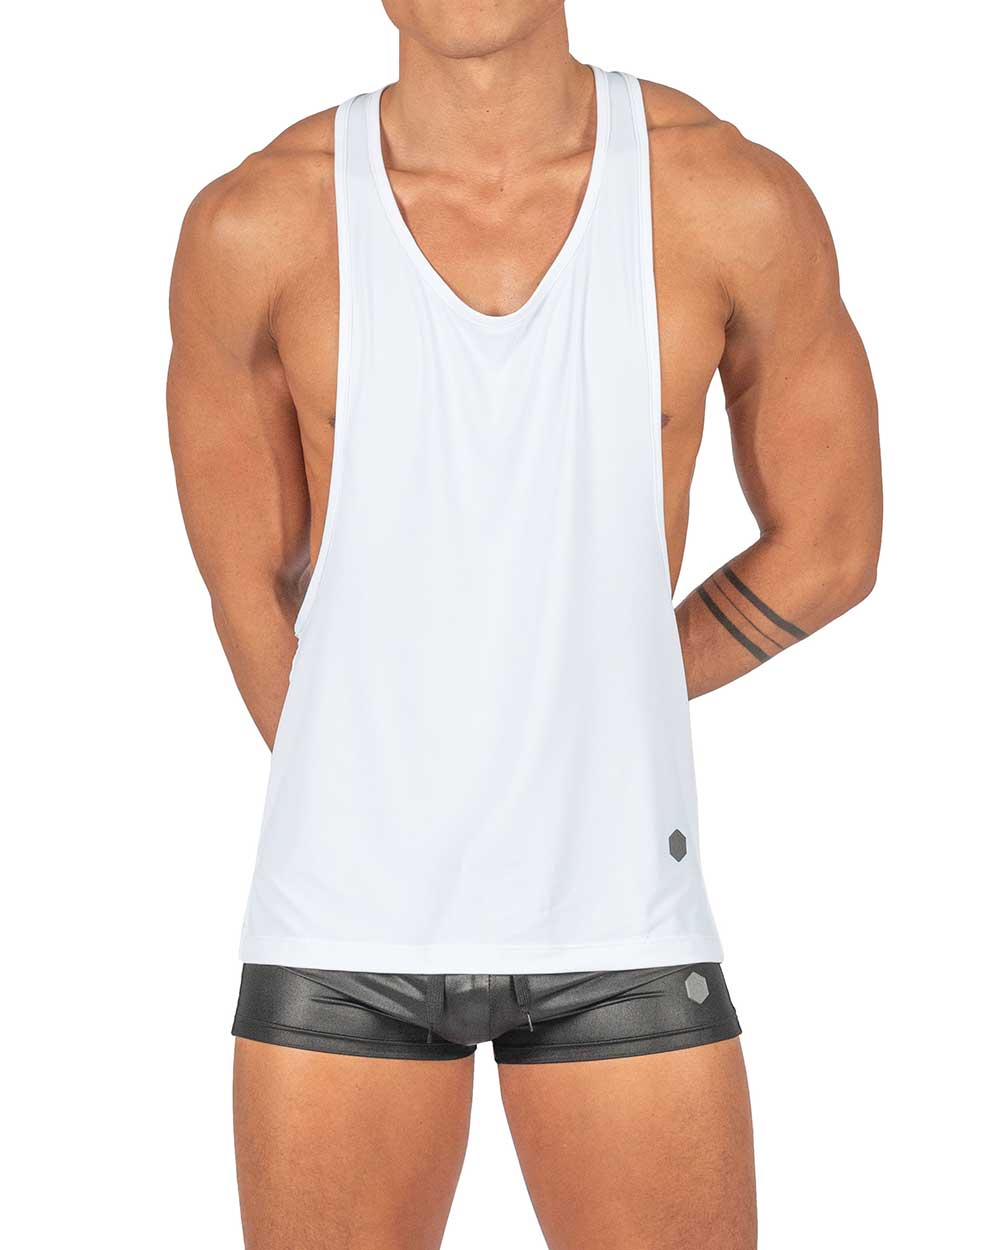 Party Troop Raver Jersey Tank - White [4433]